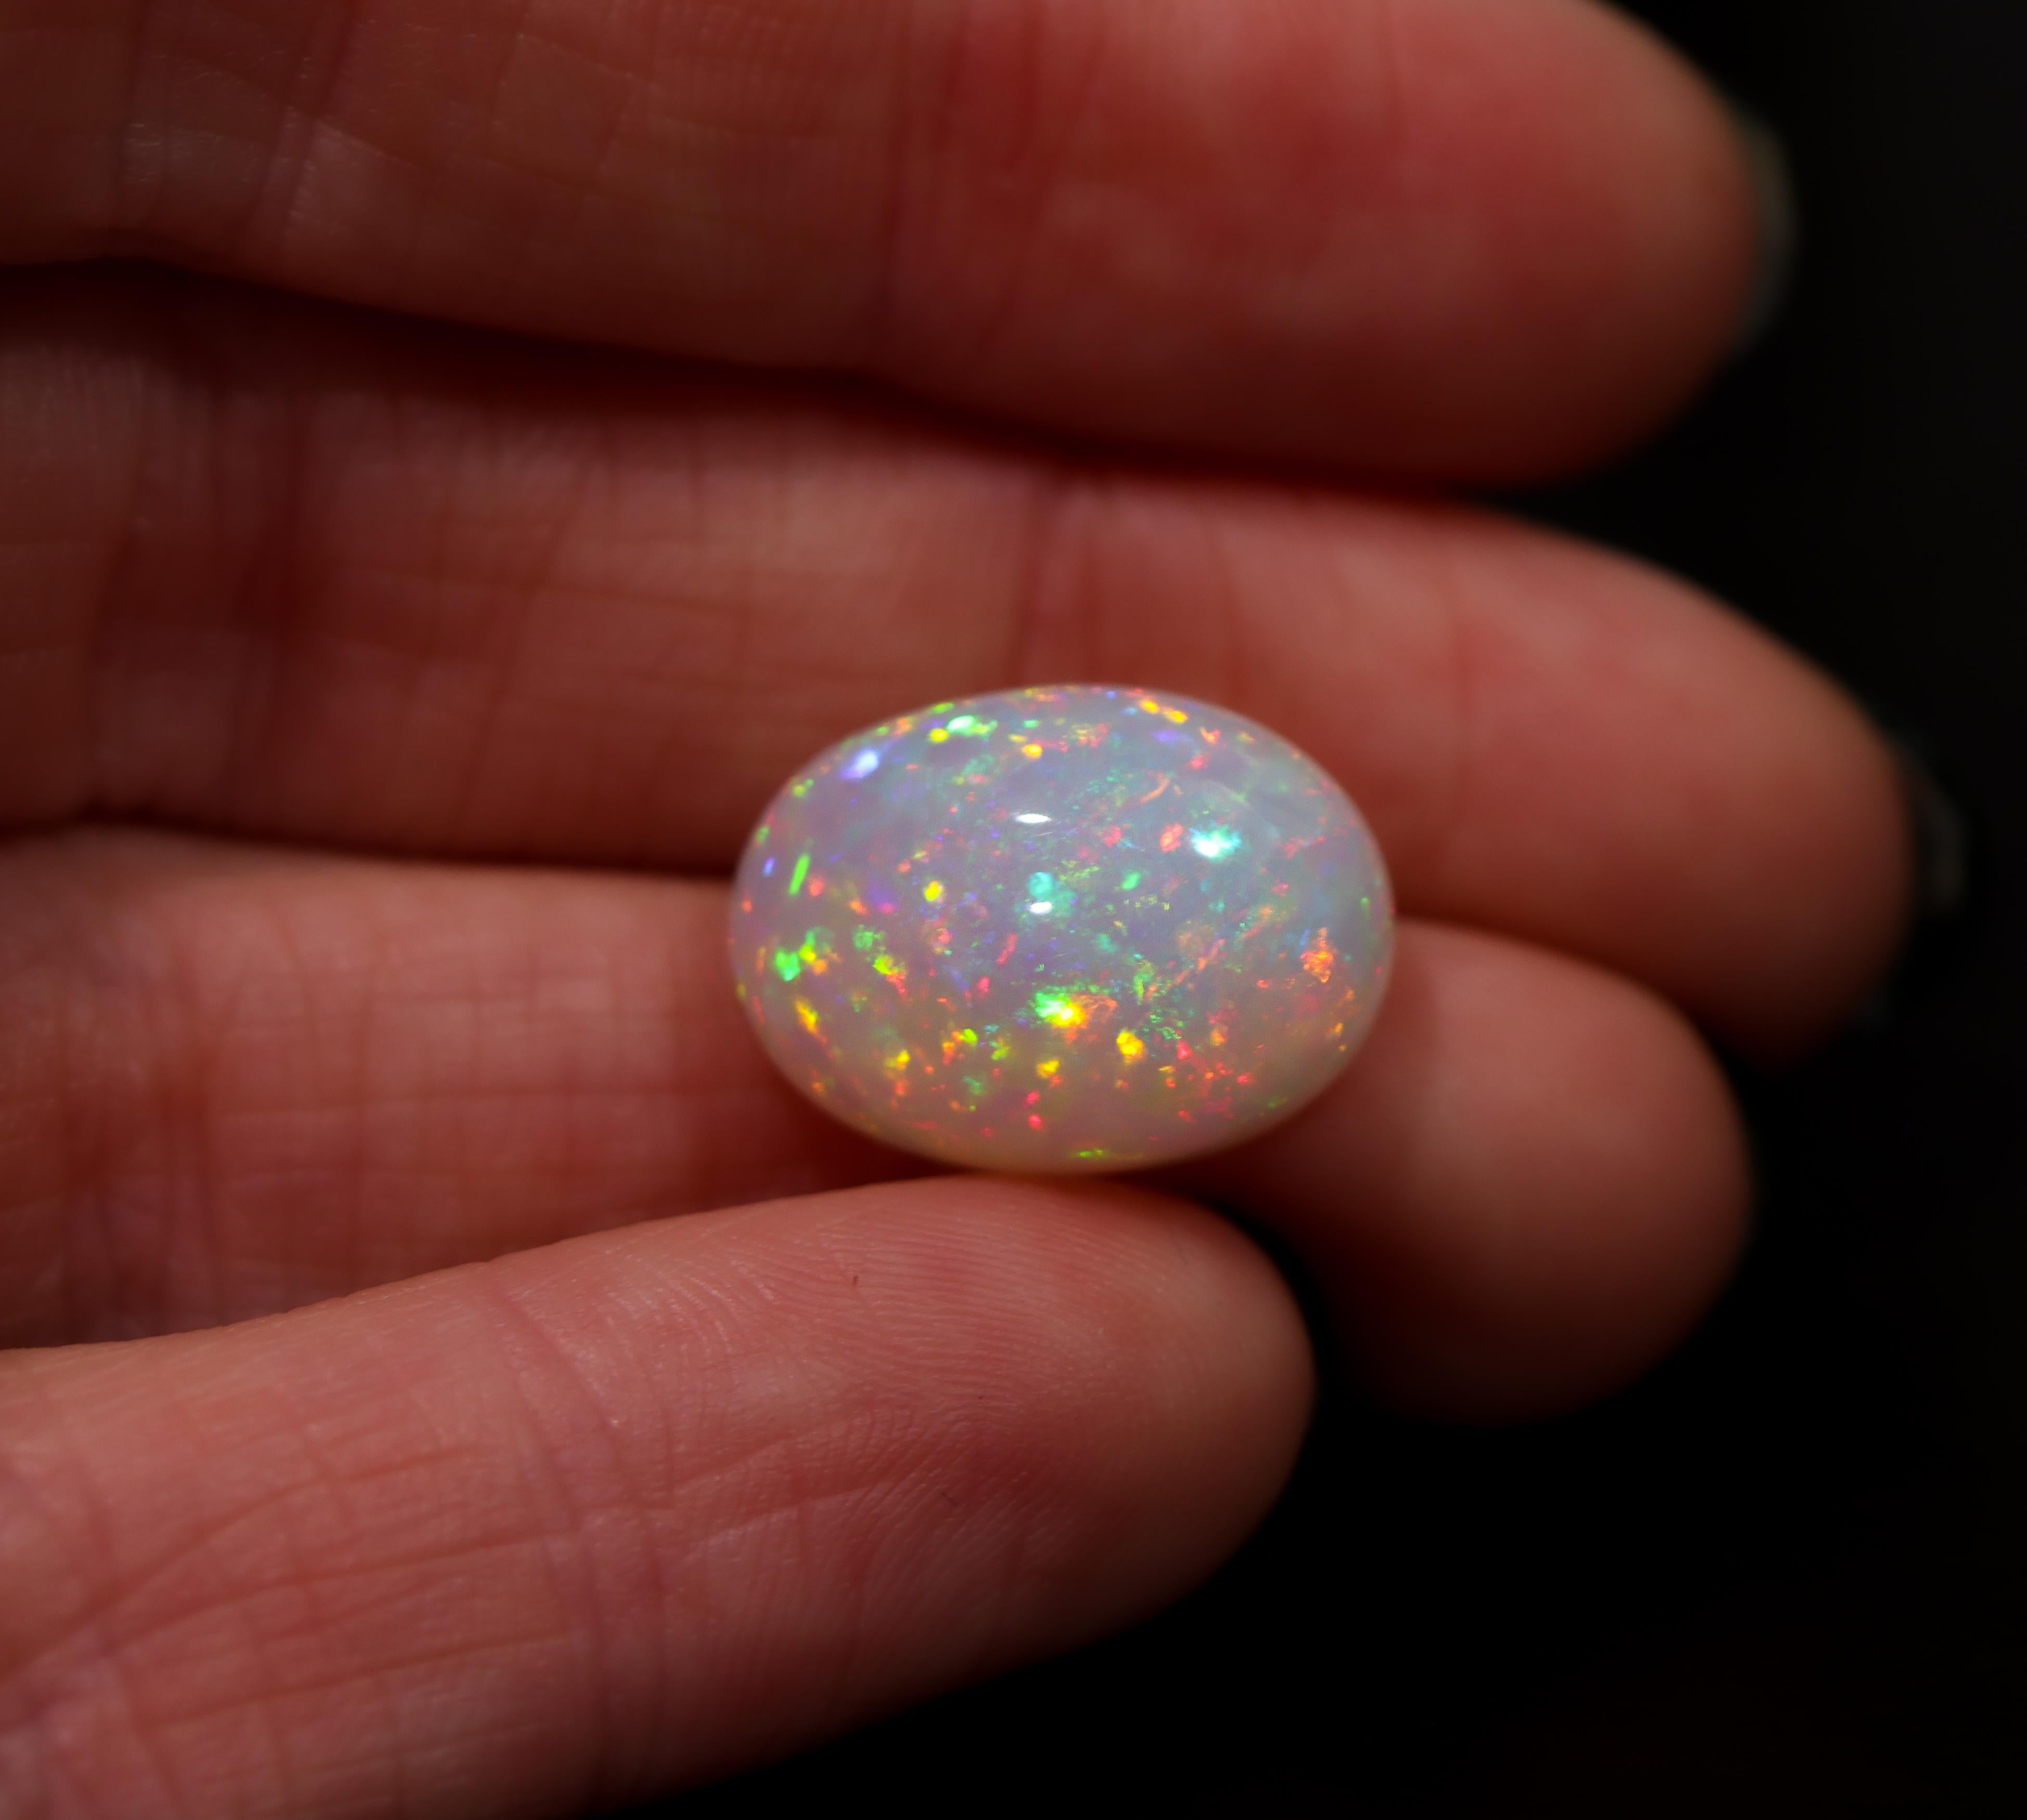 Presenting a 7.33 carat ethiopian opal loose gemstone. Nothing beats this gem’s play-of-color! This gemstone is ideal for creating elegant and enchanting jewelry pieces! 

Specifications

Stone: Opal
Shape: Oval
Treatment: None
Hardness: 5.5 -